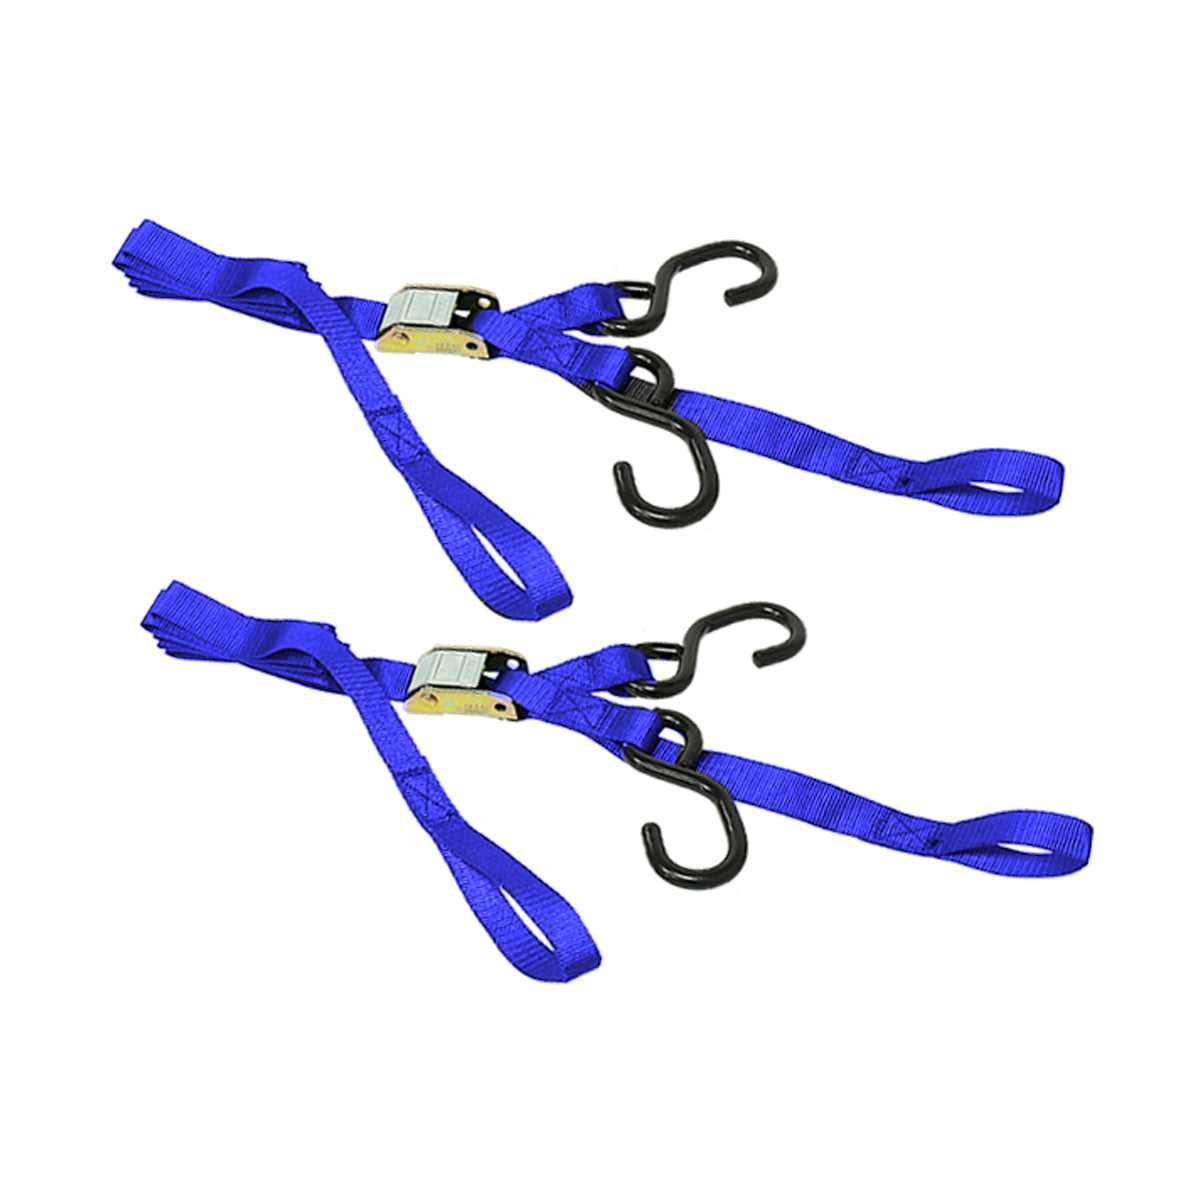 PSYCHIC MX, CLASSIC TIEDOWN PSYCHIC INTEGRATED SOFT HOOK 2,500LBS  RATED ASSEMBLY STRENGTH BLUE